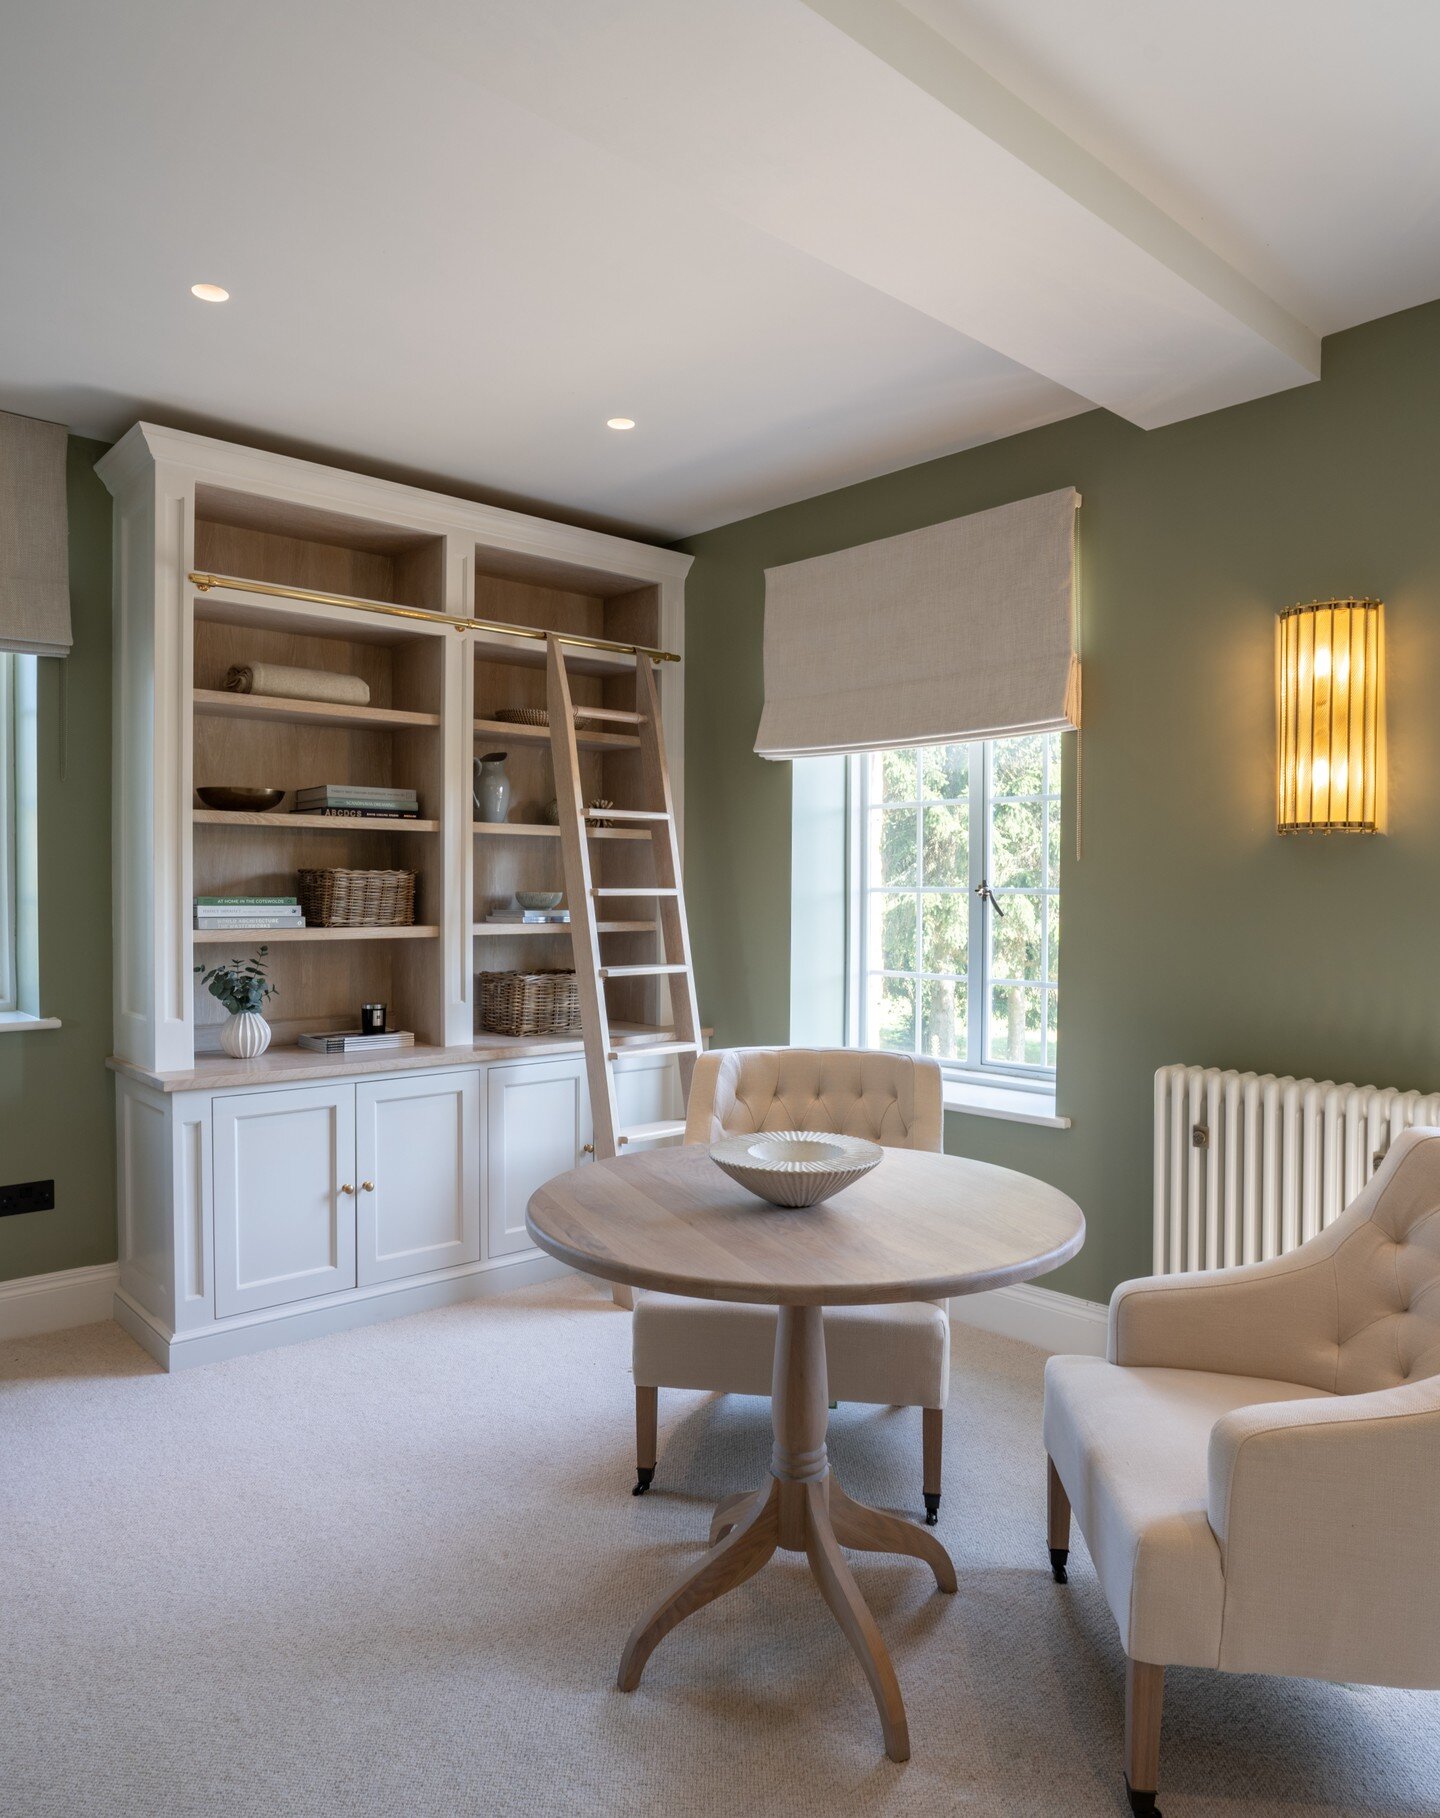 One of our favourite rooms we designed at our manor house project was this library. We created a timeless space to be a balance between work and home life. Beautifully crafted joinery is one of our specialities to design and produce; here we balance 